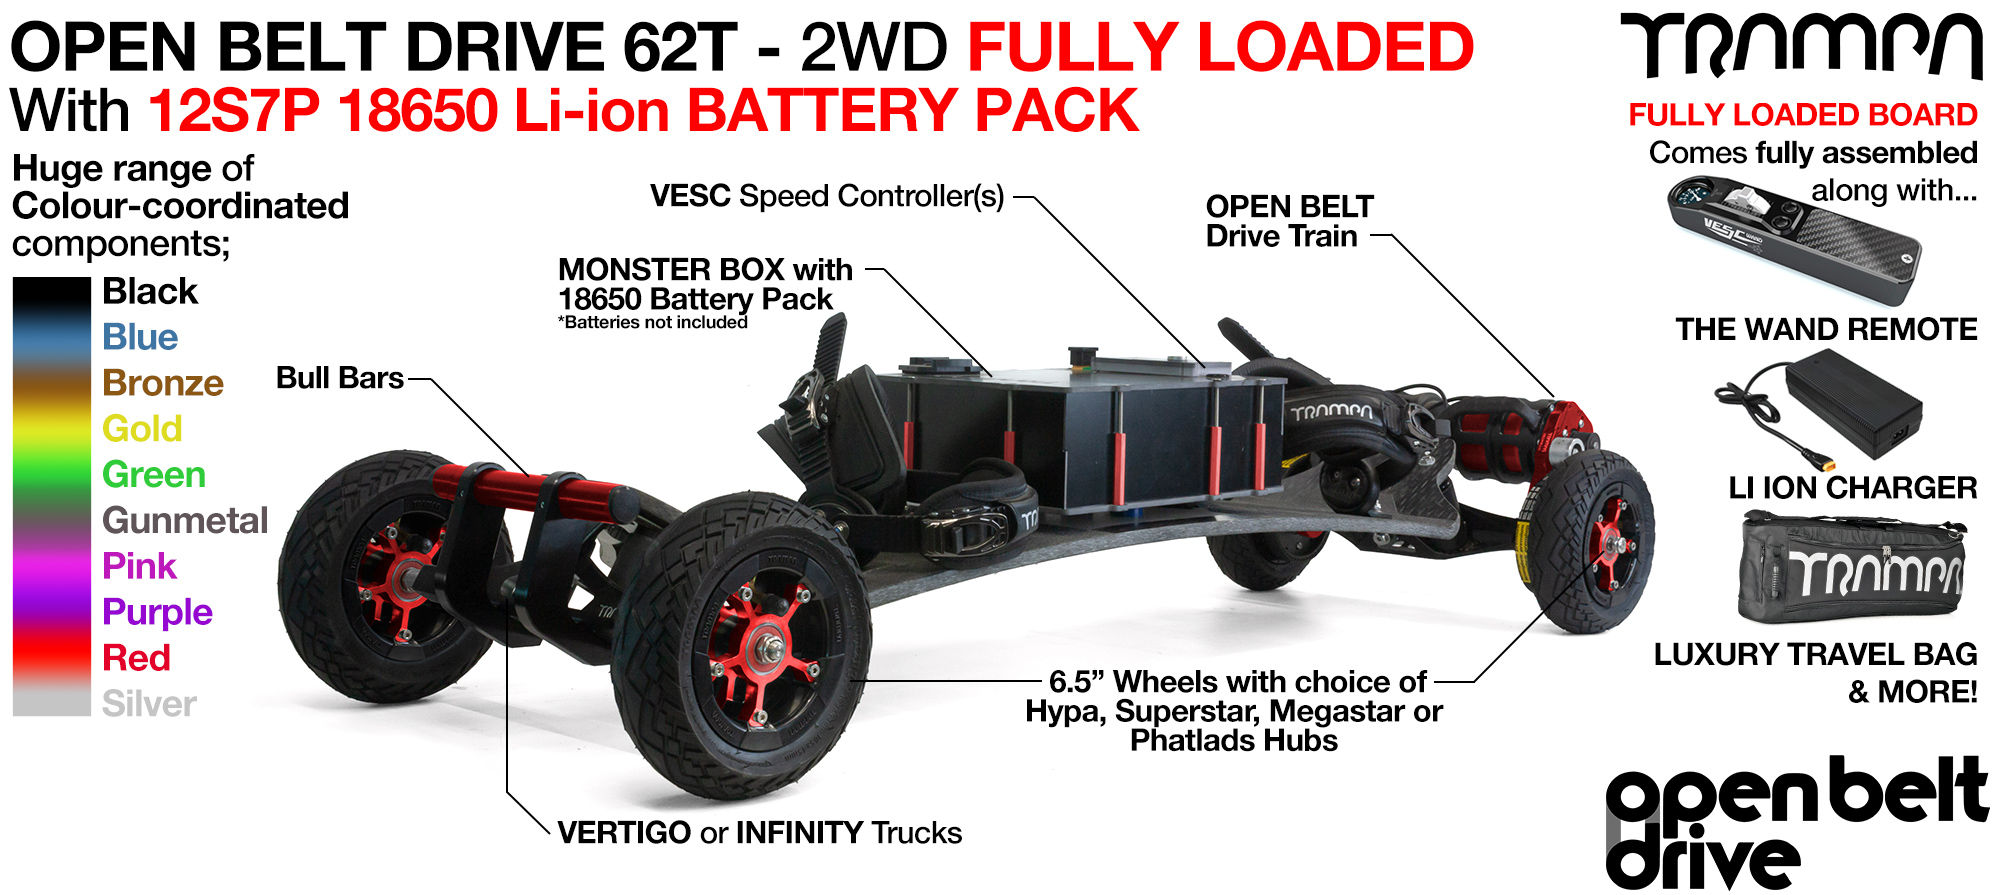 2WD 66T Open Belt Drive TRAMPA Electric Mountainboard with 6 Inch URBAN TREADs Wheels & 62 Tooth Pulleys - FULLY LOADED 18650 CELL Pack